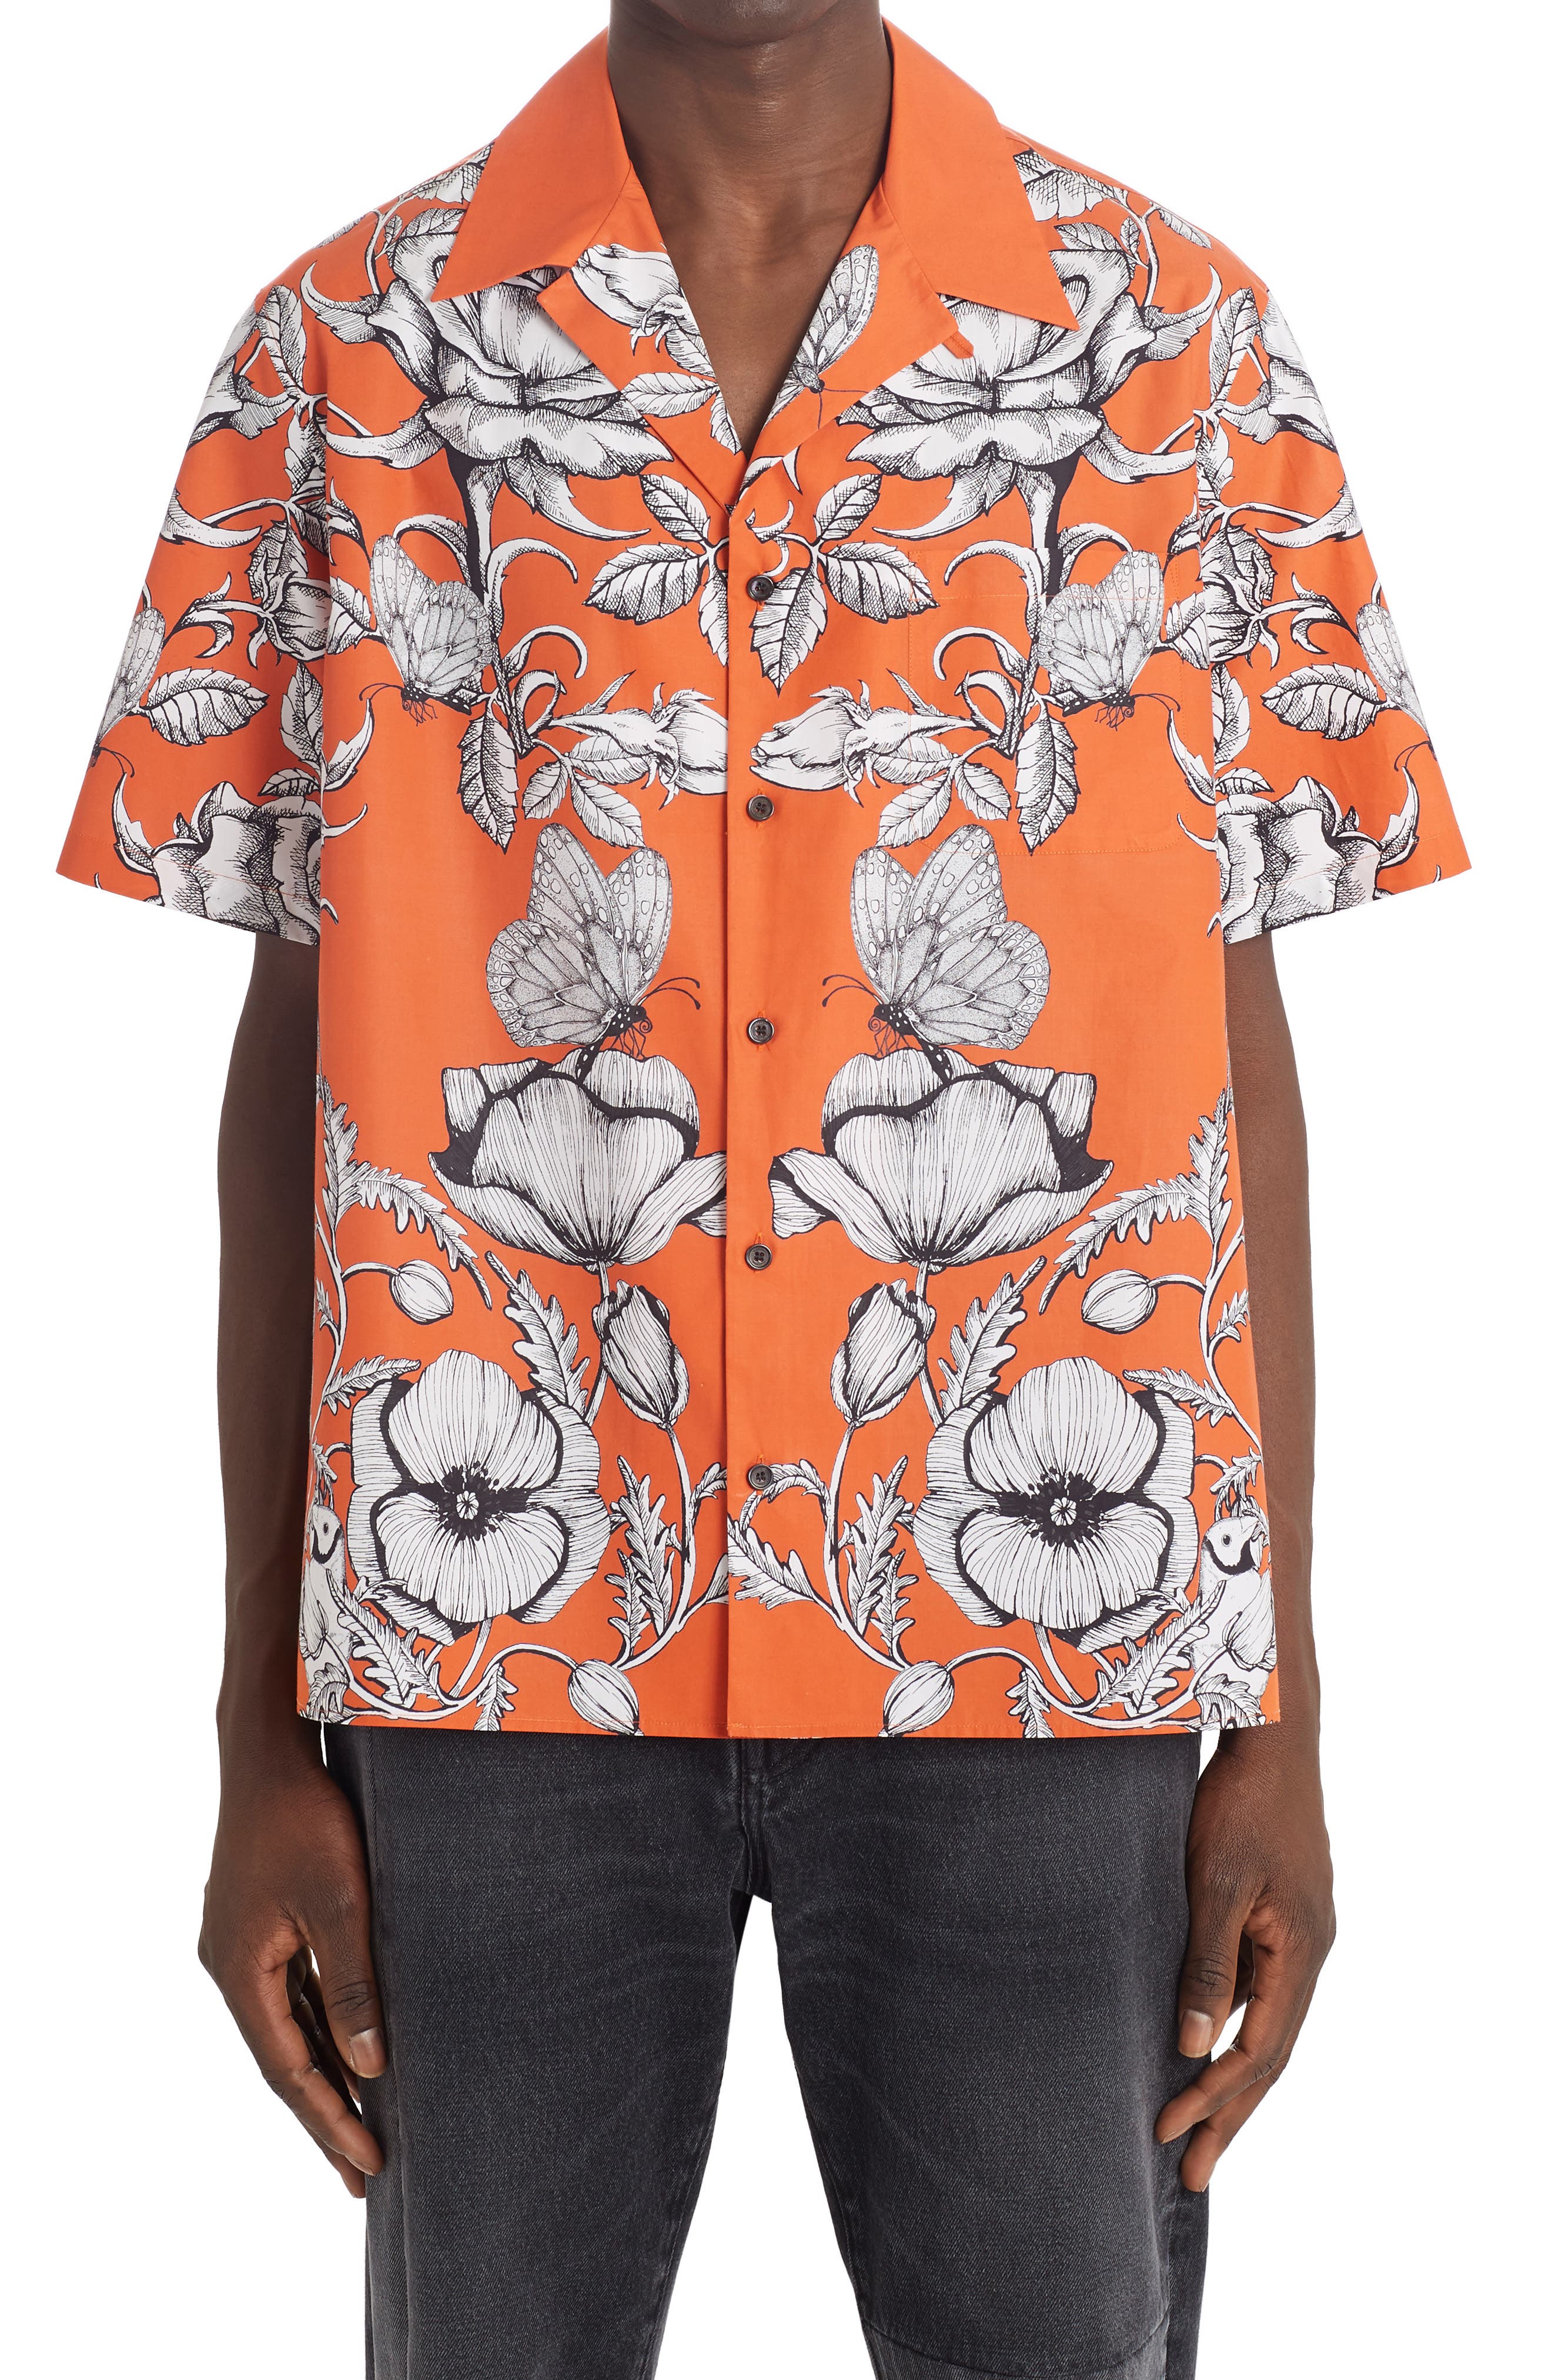 Valentino Dark Blooming Floral Short Sleeve Button-Up Shirt in Orange at Nordstrom, Size 38 Us